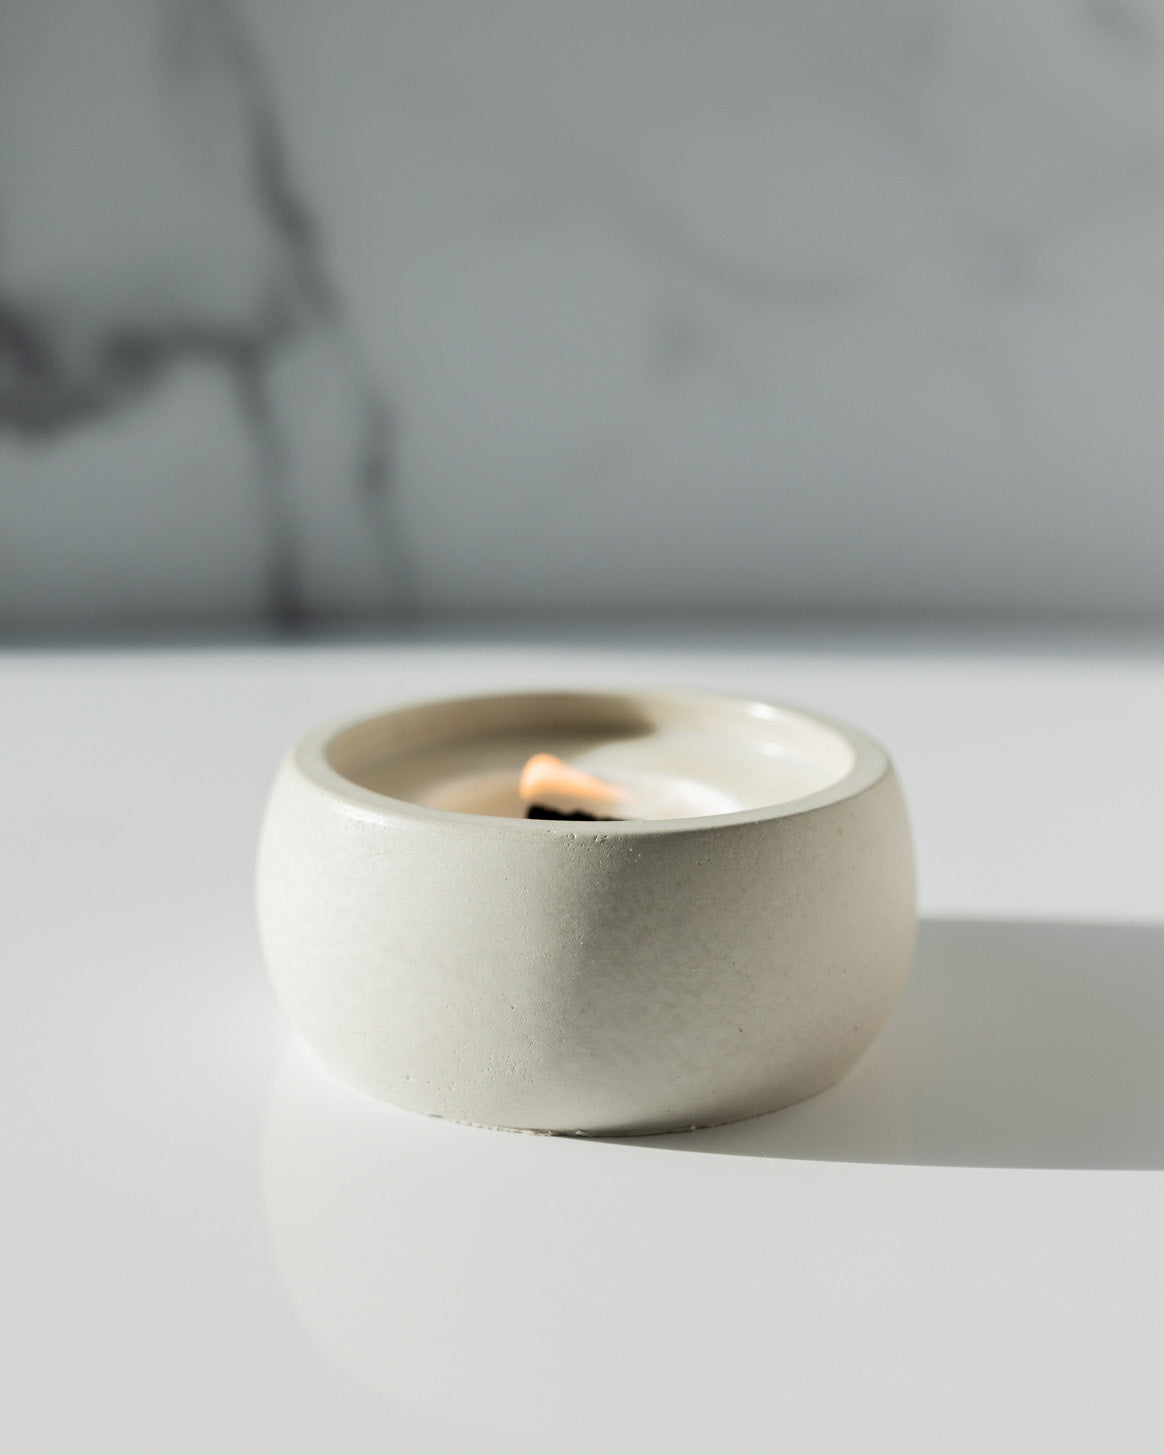 Calm Within the Chaos Coconut Soy Candle - Concrete Wooden Wick Vessel